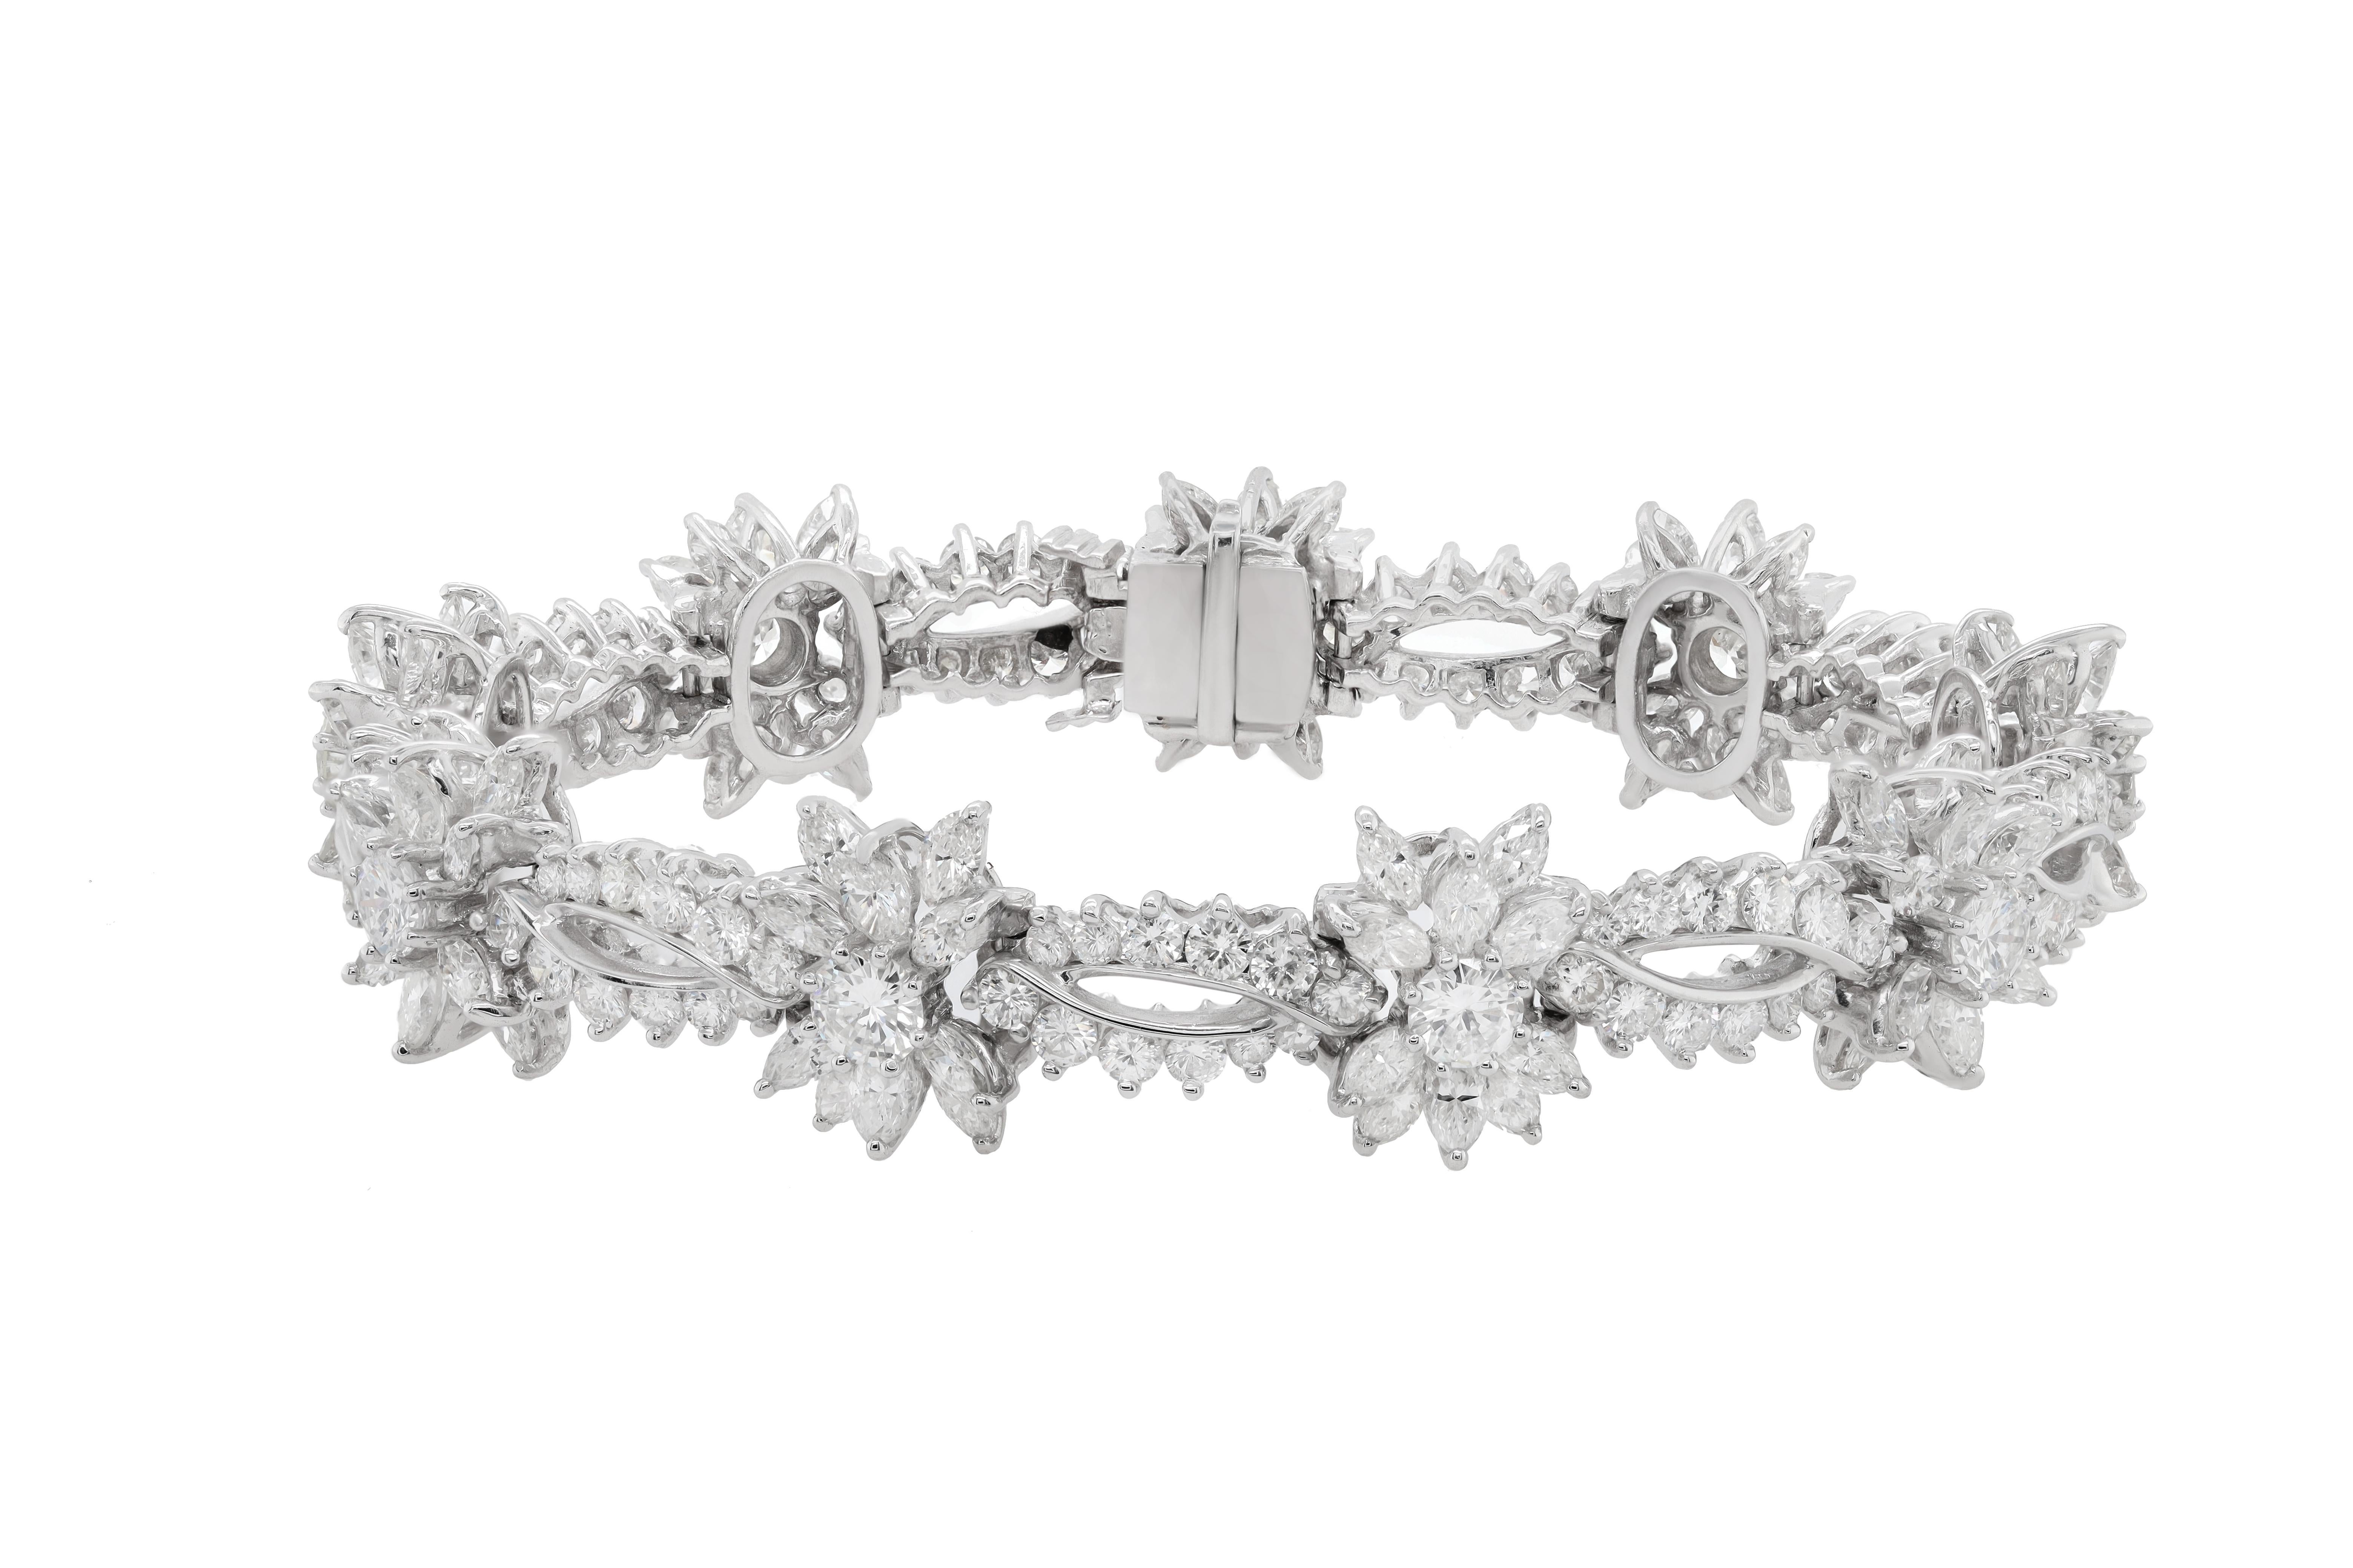 Platinum diamond fashion bracelet featuring snow flake cluster design totaling 23.00 cts of marquise and round diamonds
Diana M. is a leading supplier of top-quality fine jewelry for over 35 years.
Diana M is one-stop shop for all your jewelry